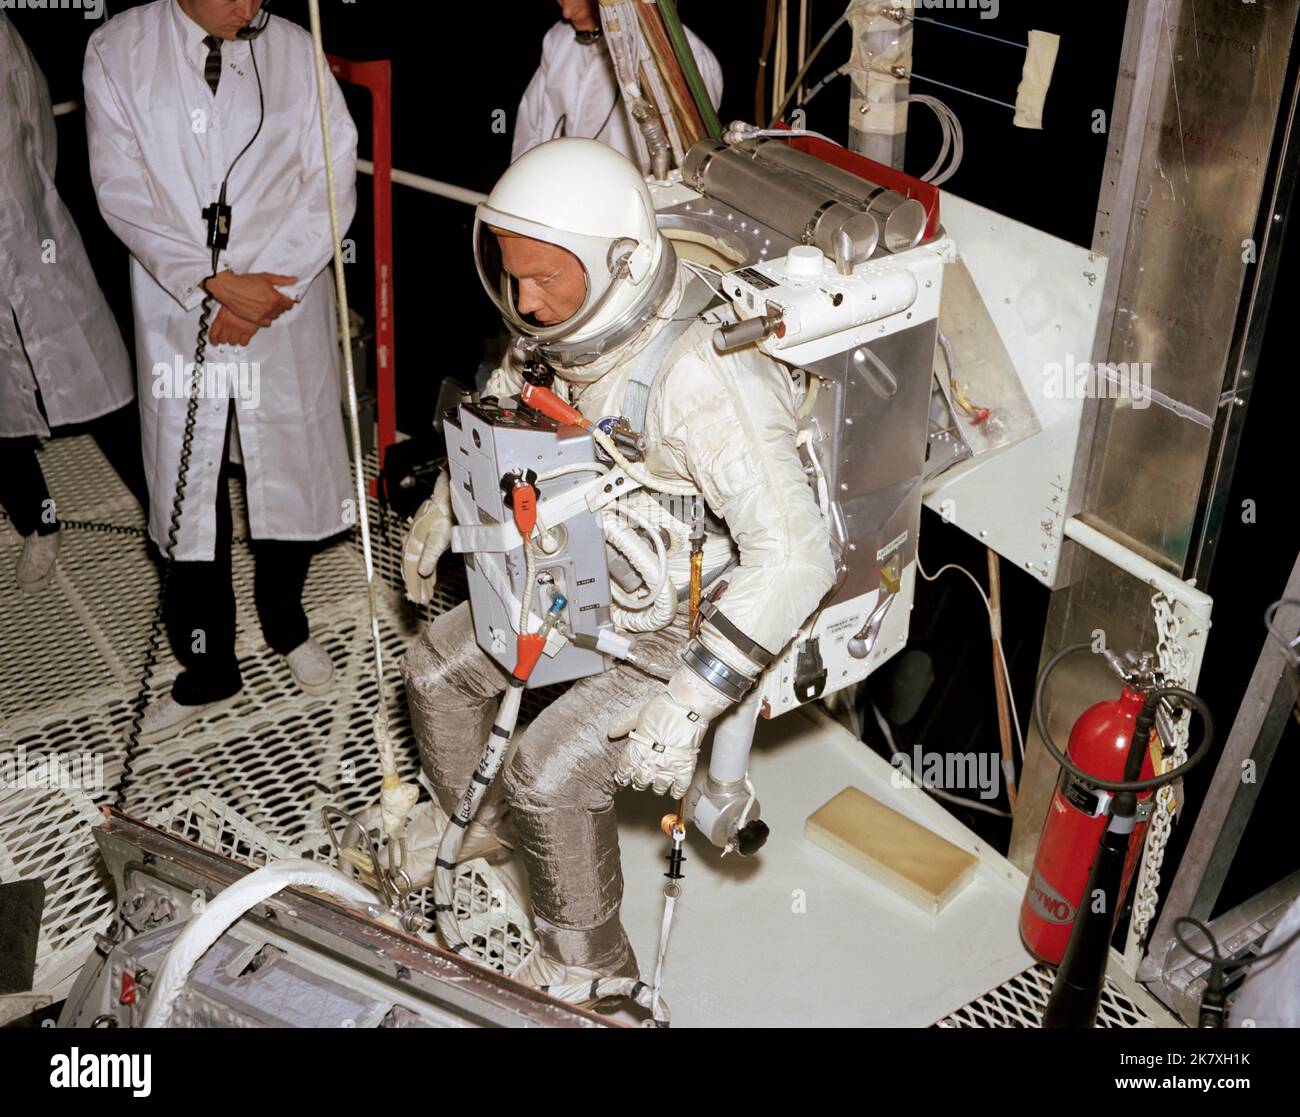 Astronaut Edwin E. 'Buzz' Aldrin, prime crew pilot of the Gemini XII spaceflight, undergoes evaluation procedures with the Astronaut Maneuvering Unit in the 30-foot altitude chamber at McDonnell Aircraft. The Astronaut Maneuvering Unit subsequently was deleted from the mission so Aldrin could demonstrate basic spacewalk capabilities required for Apollo missions. Stock Photo